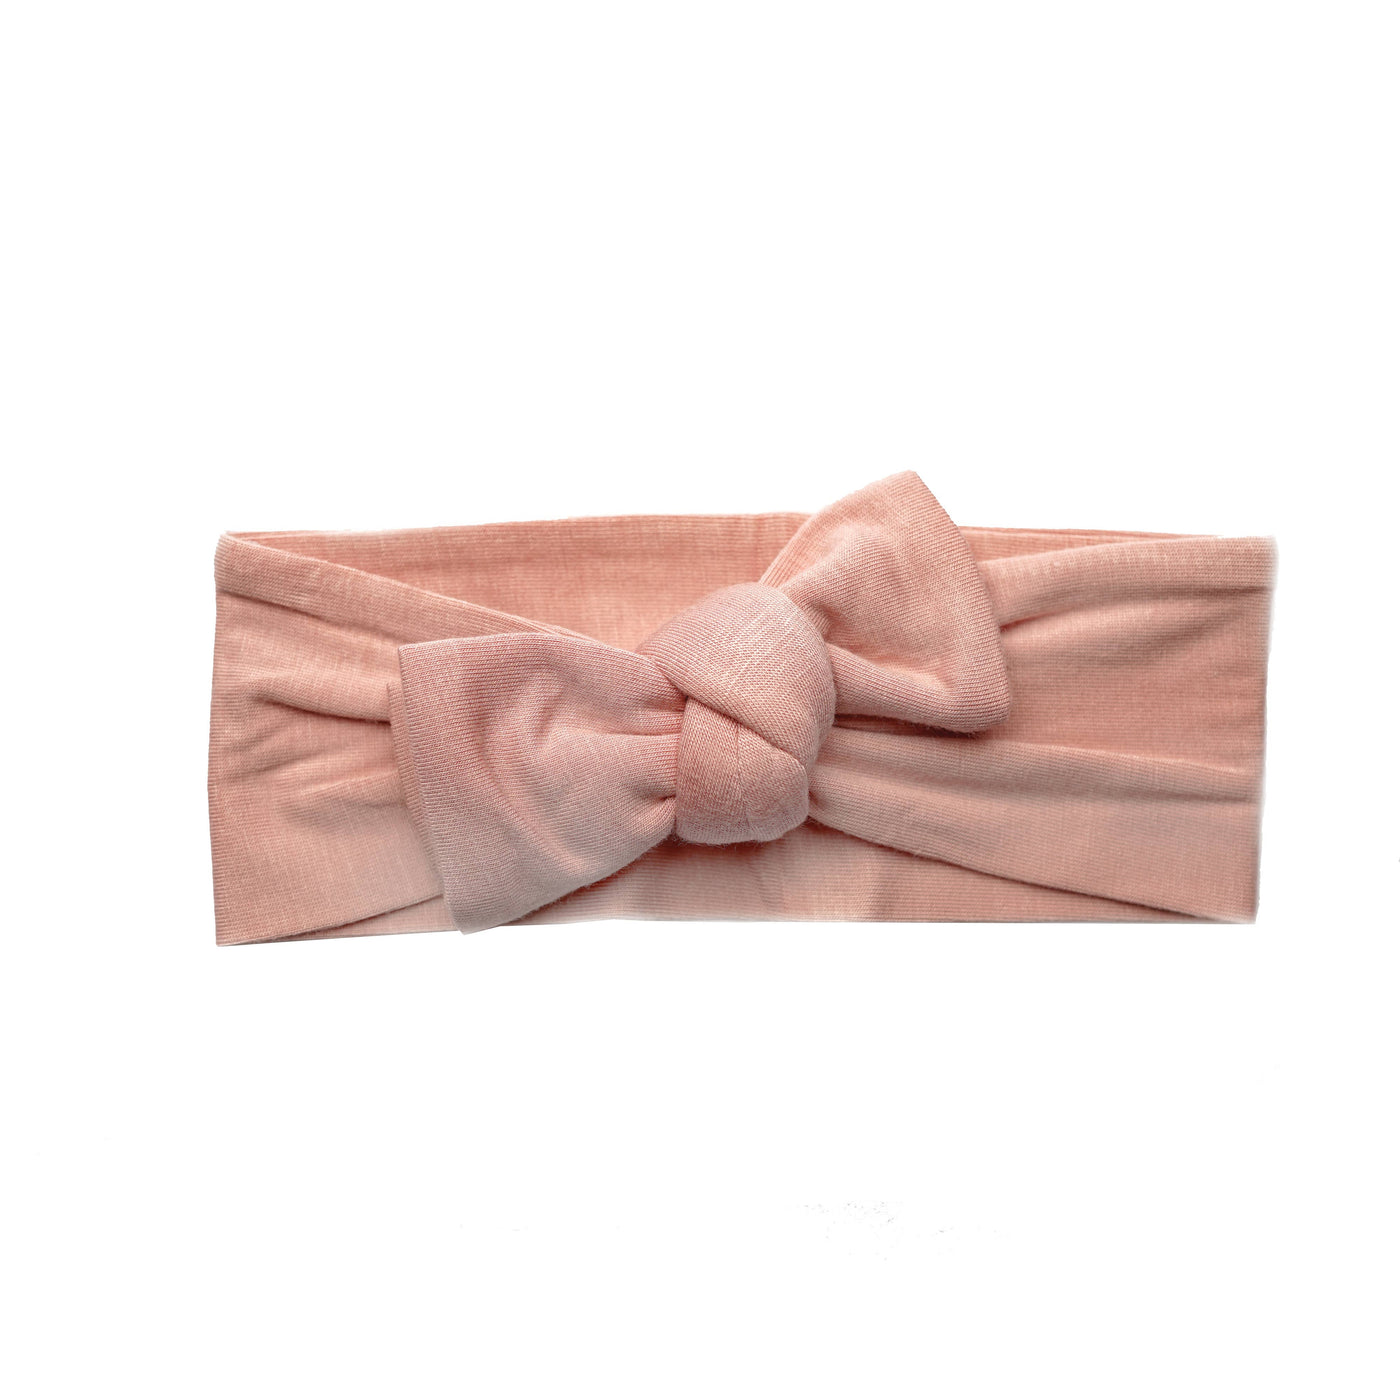 Emerson and Friends Dusty Rose Bamboo Headband Bow - Simple Good